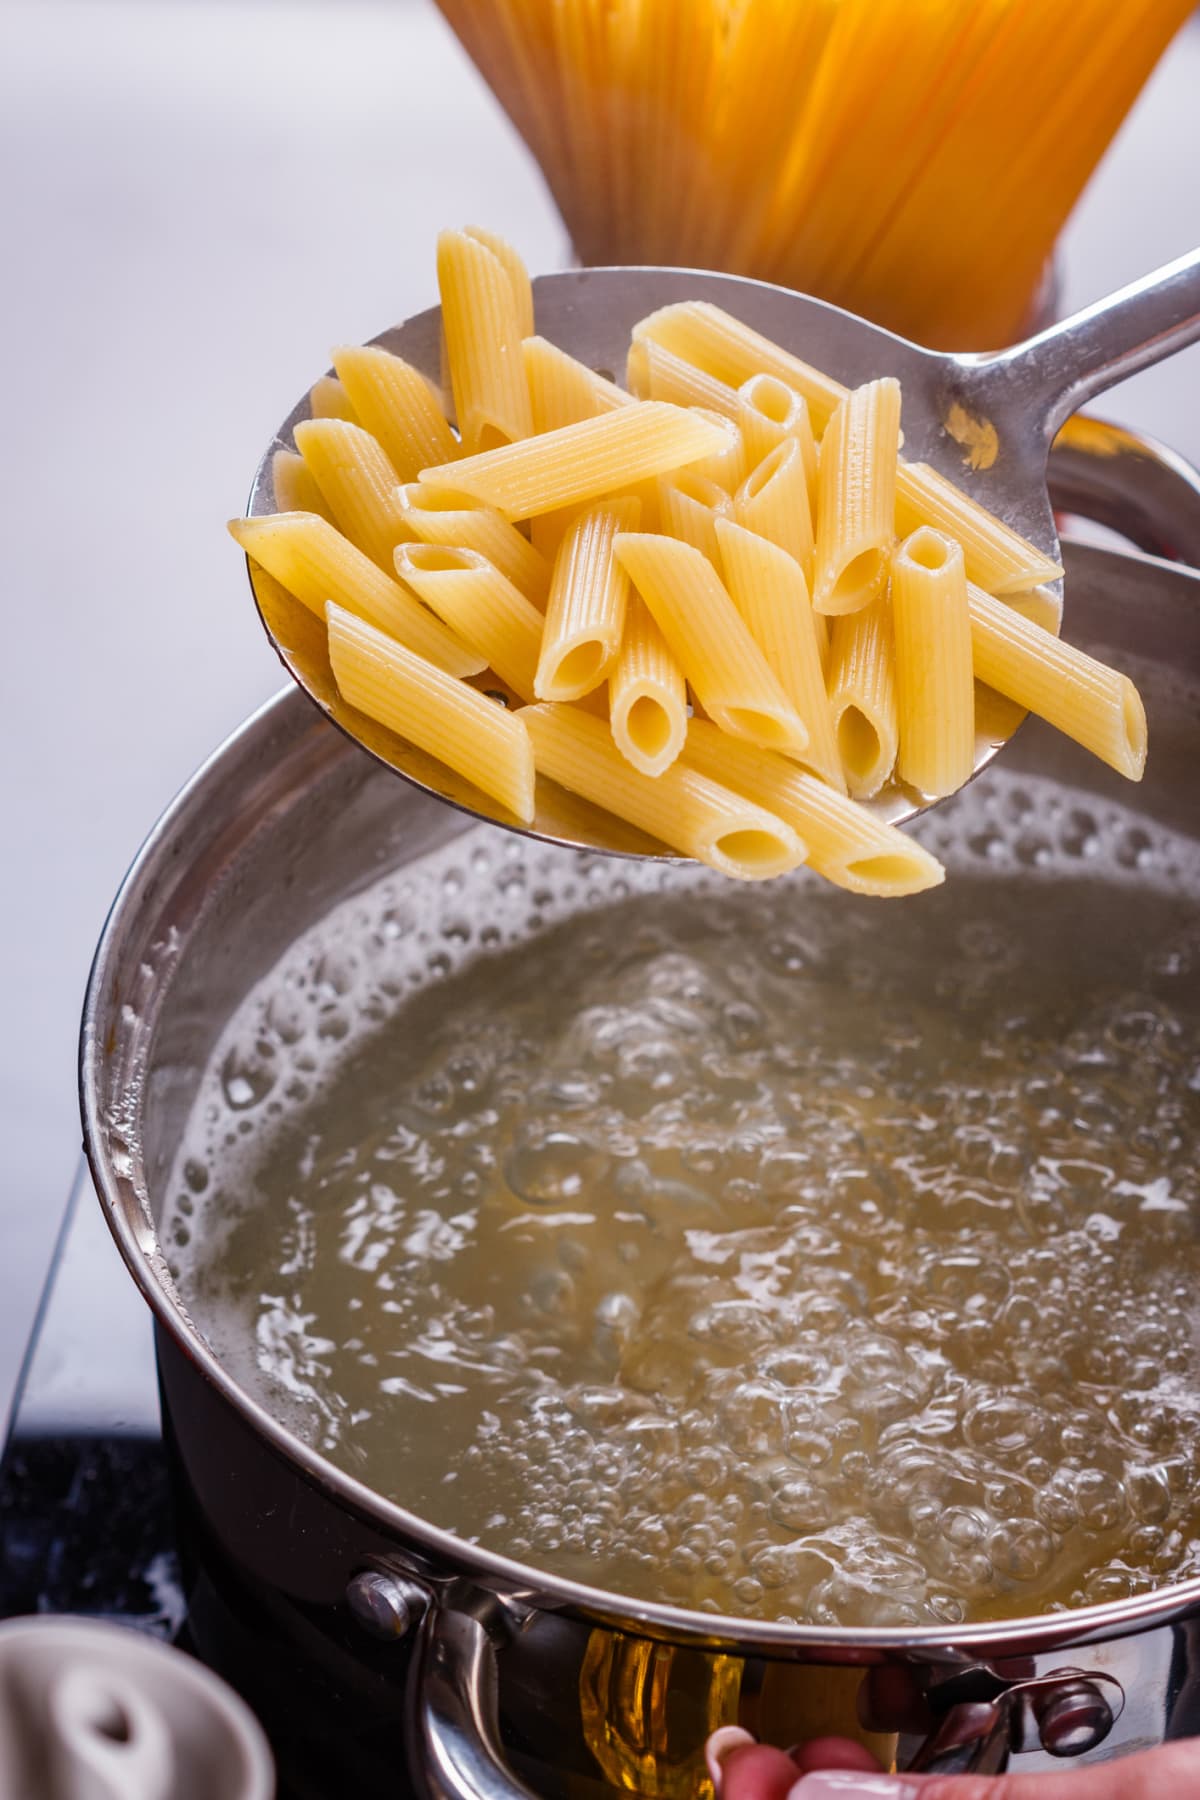 Penne pasta held in a large silver spoon over a pot of boiling water